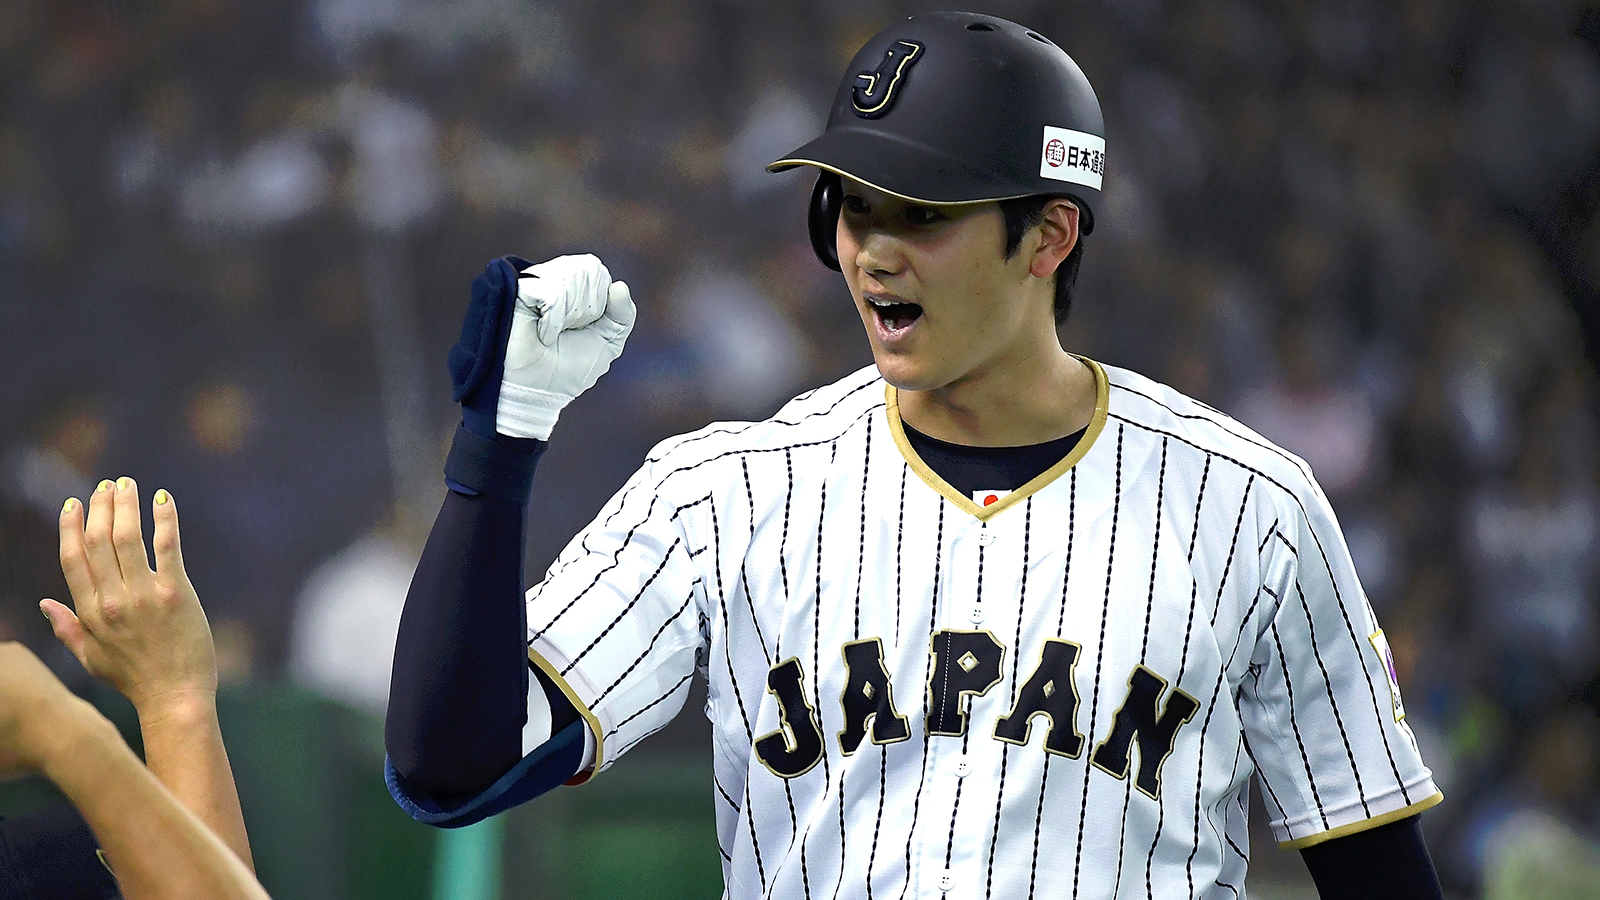 Former Mets Star Dwight Gooden Wants Shohei Ohtani to Join Mets